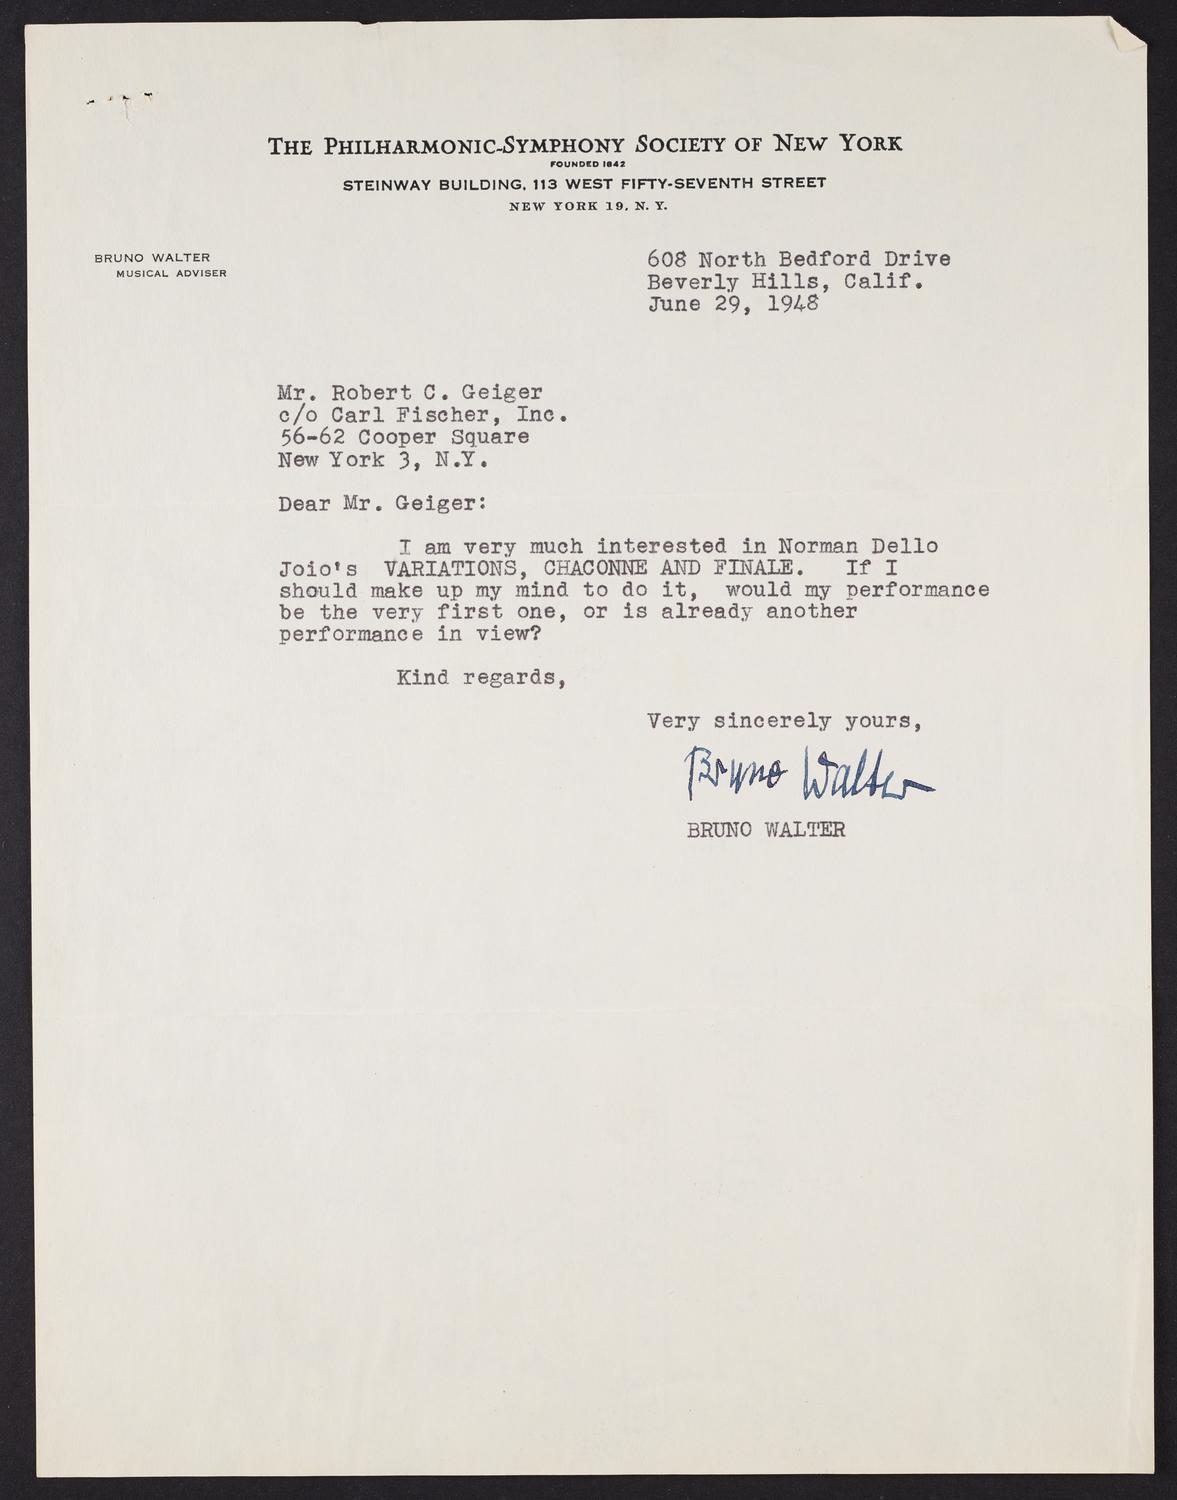 Correspondence from Bruno Walter to Robert Geiger, page 3 of 3